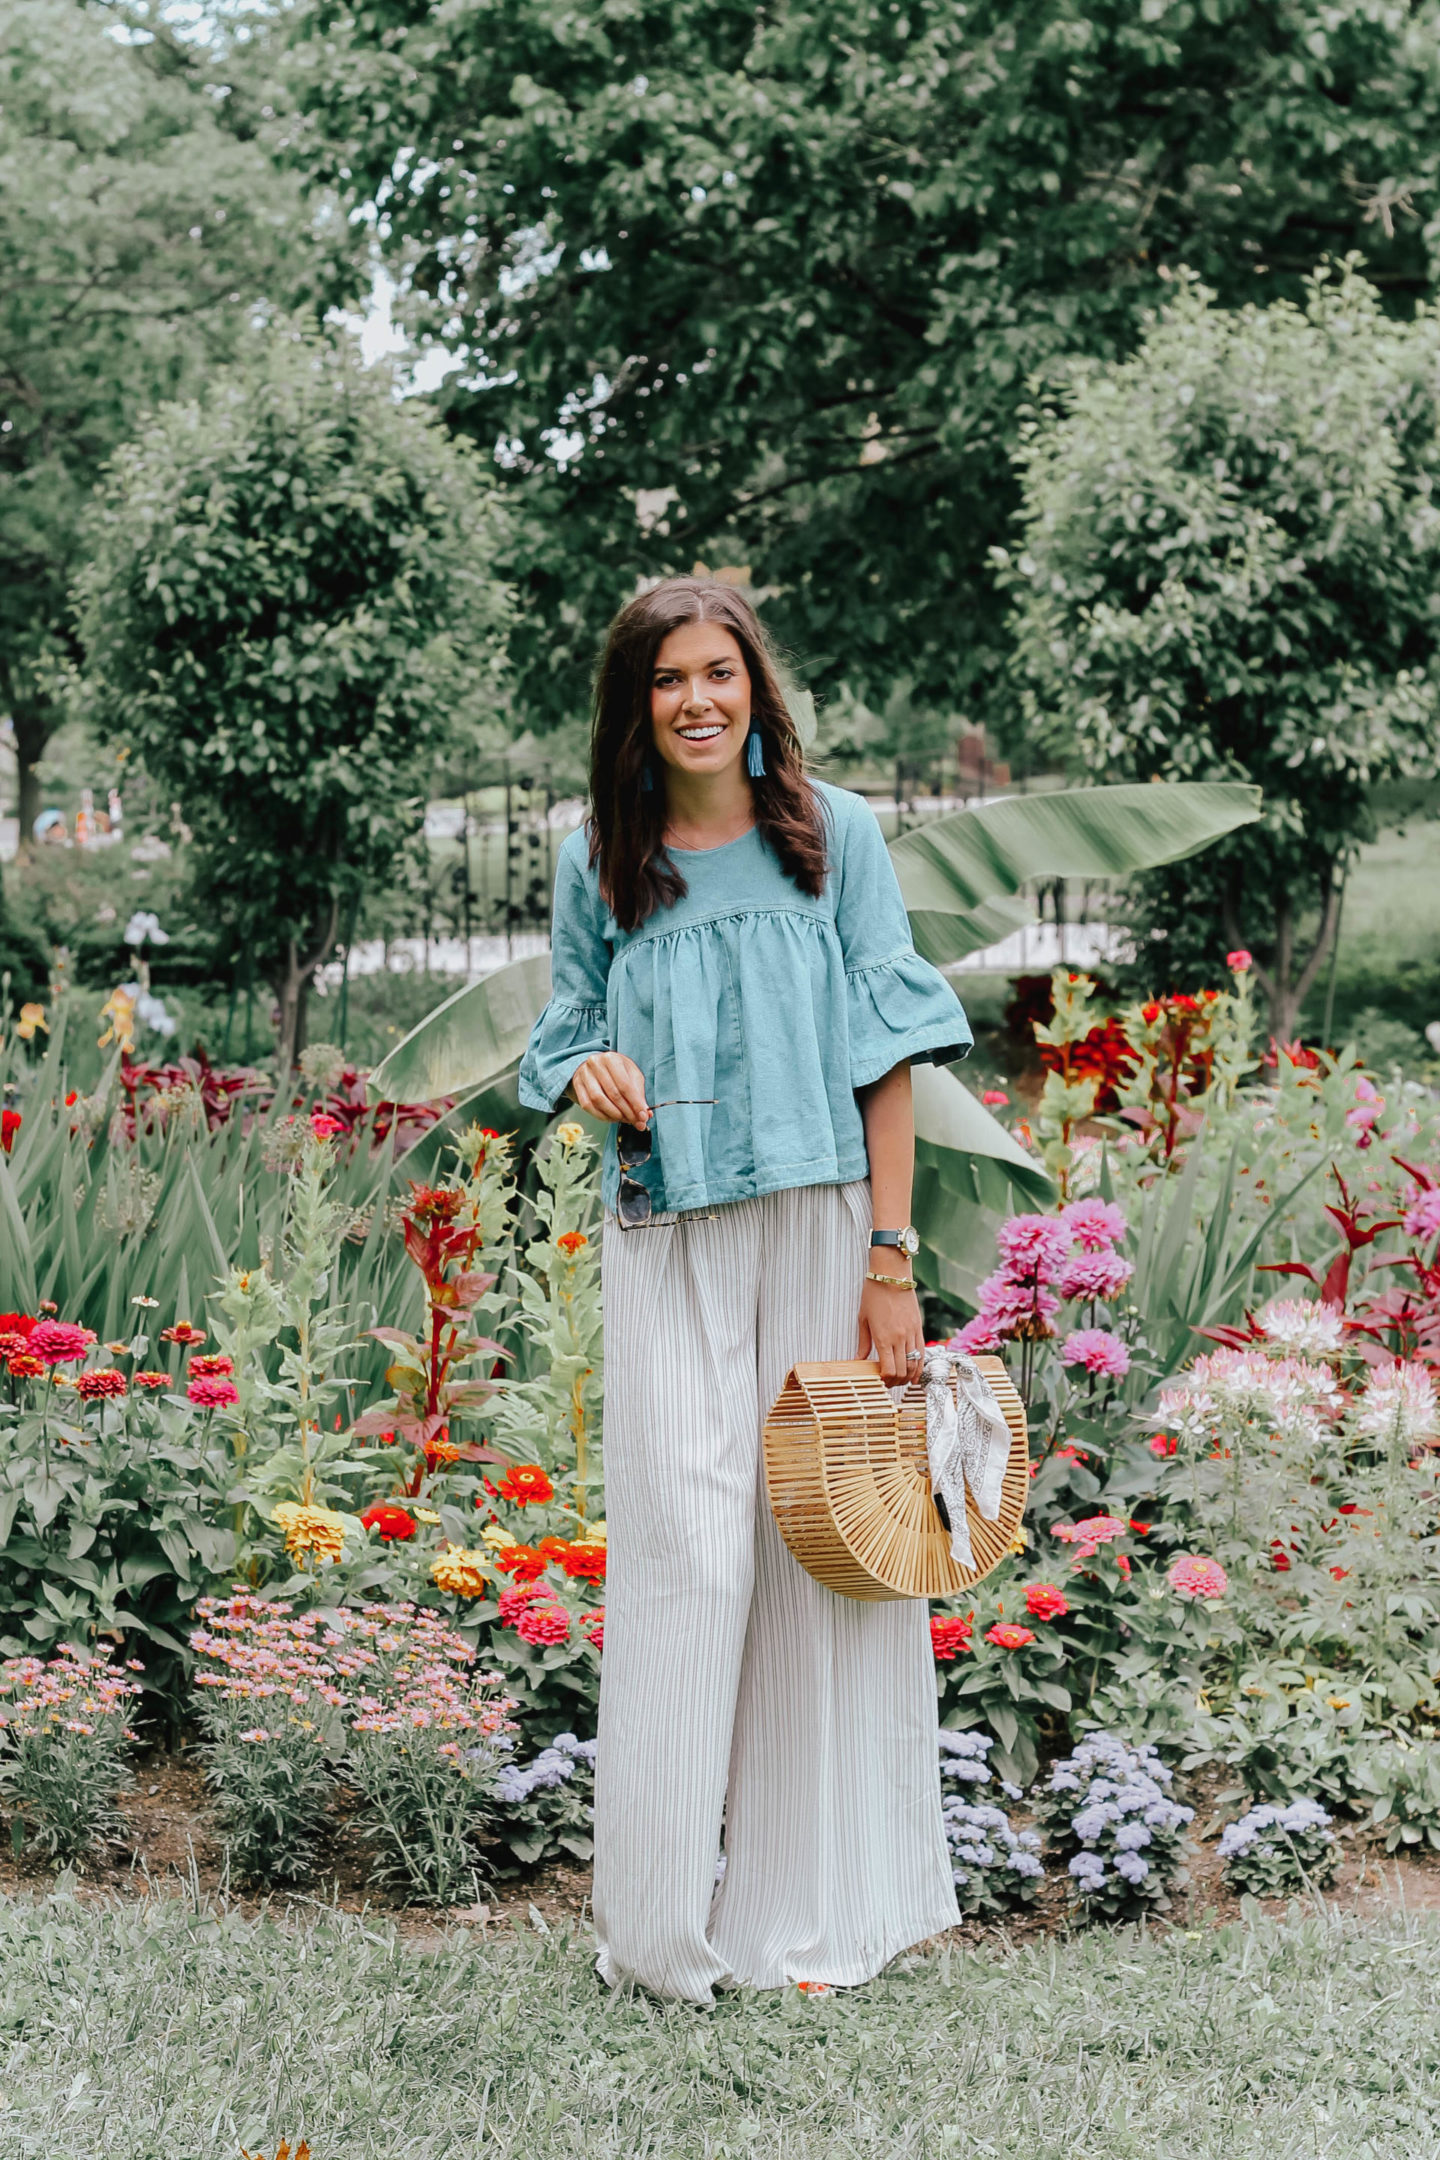 How To Style Wide Legged Pants For Summer